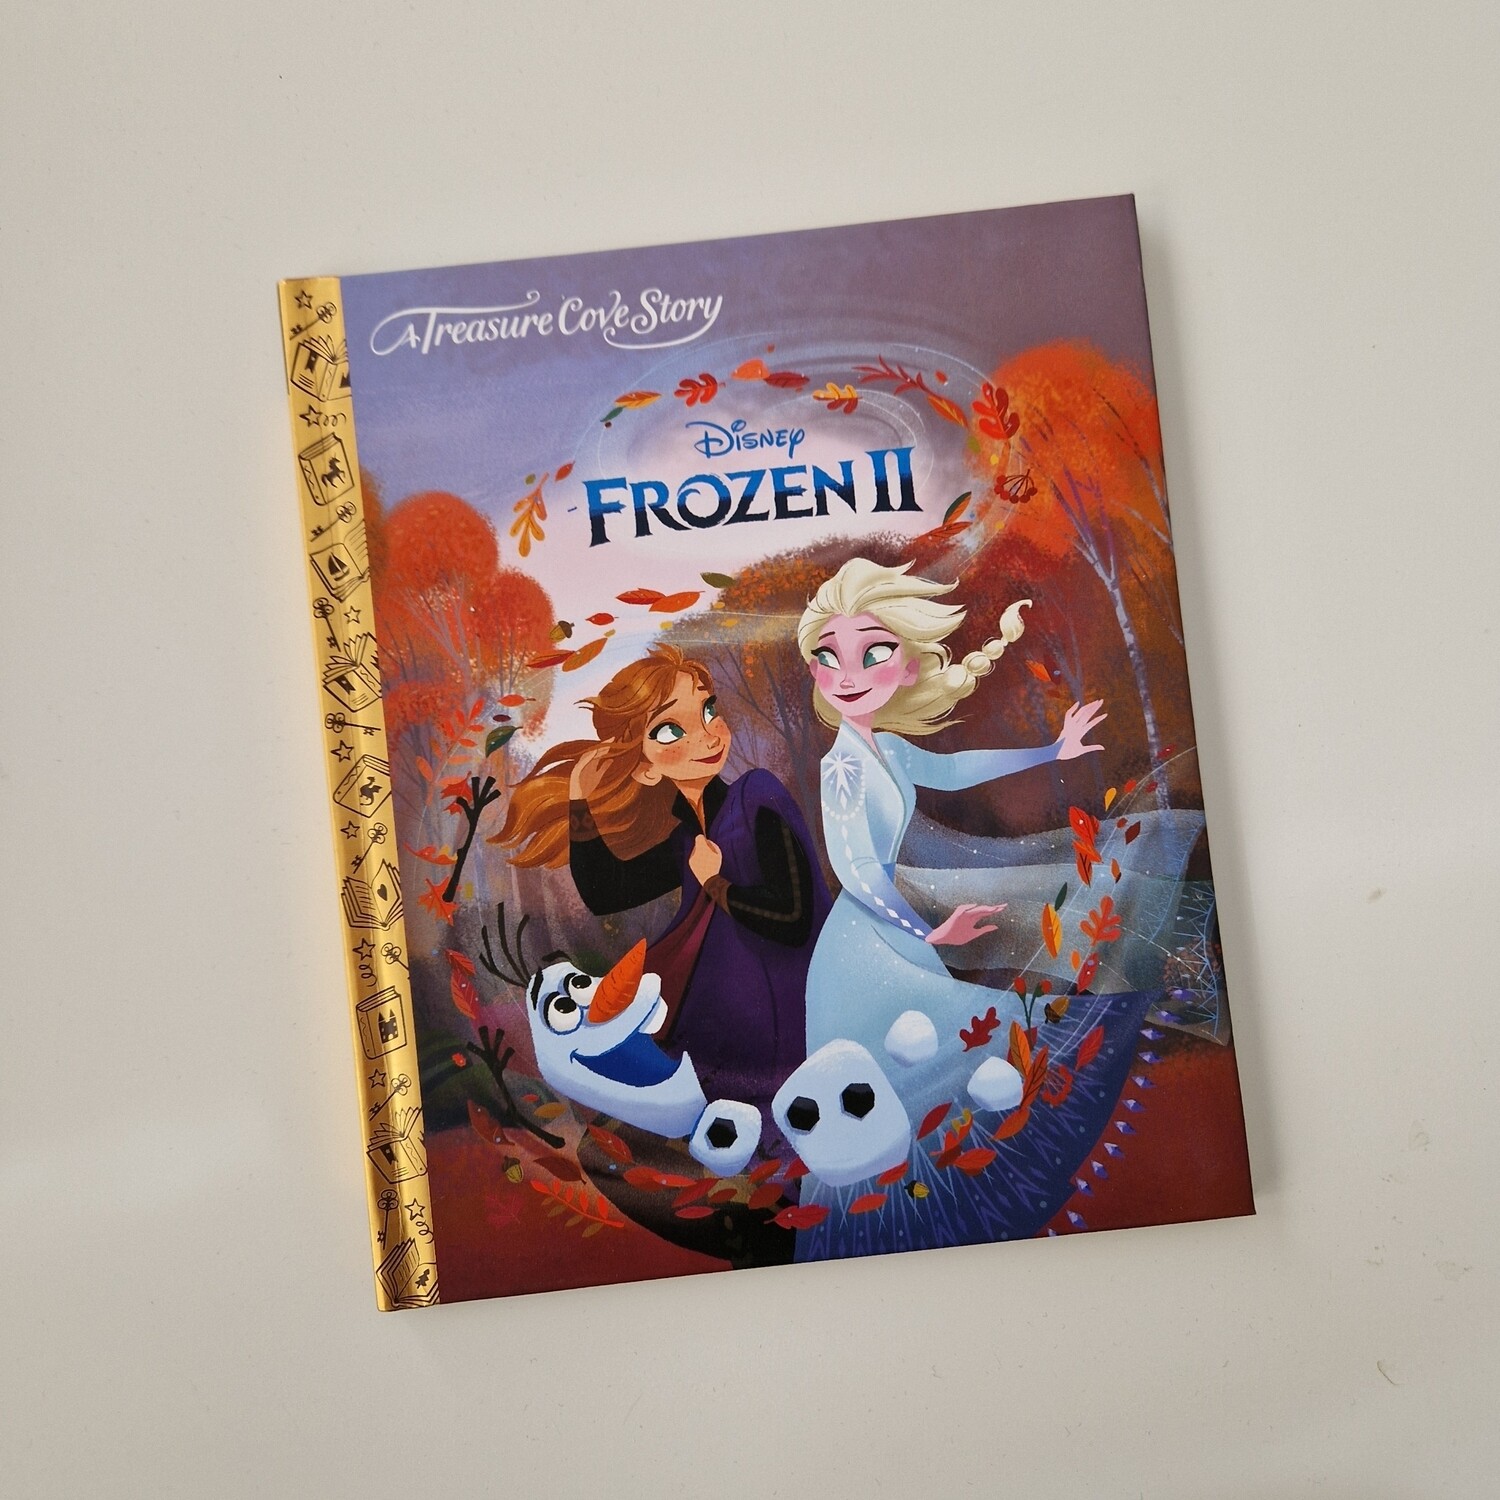 Frozen 2 Notebook - made from a board book, comes with metal book corners included